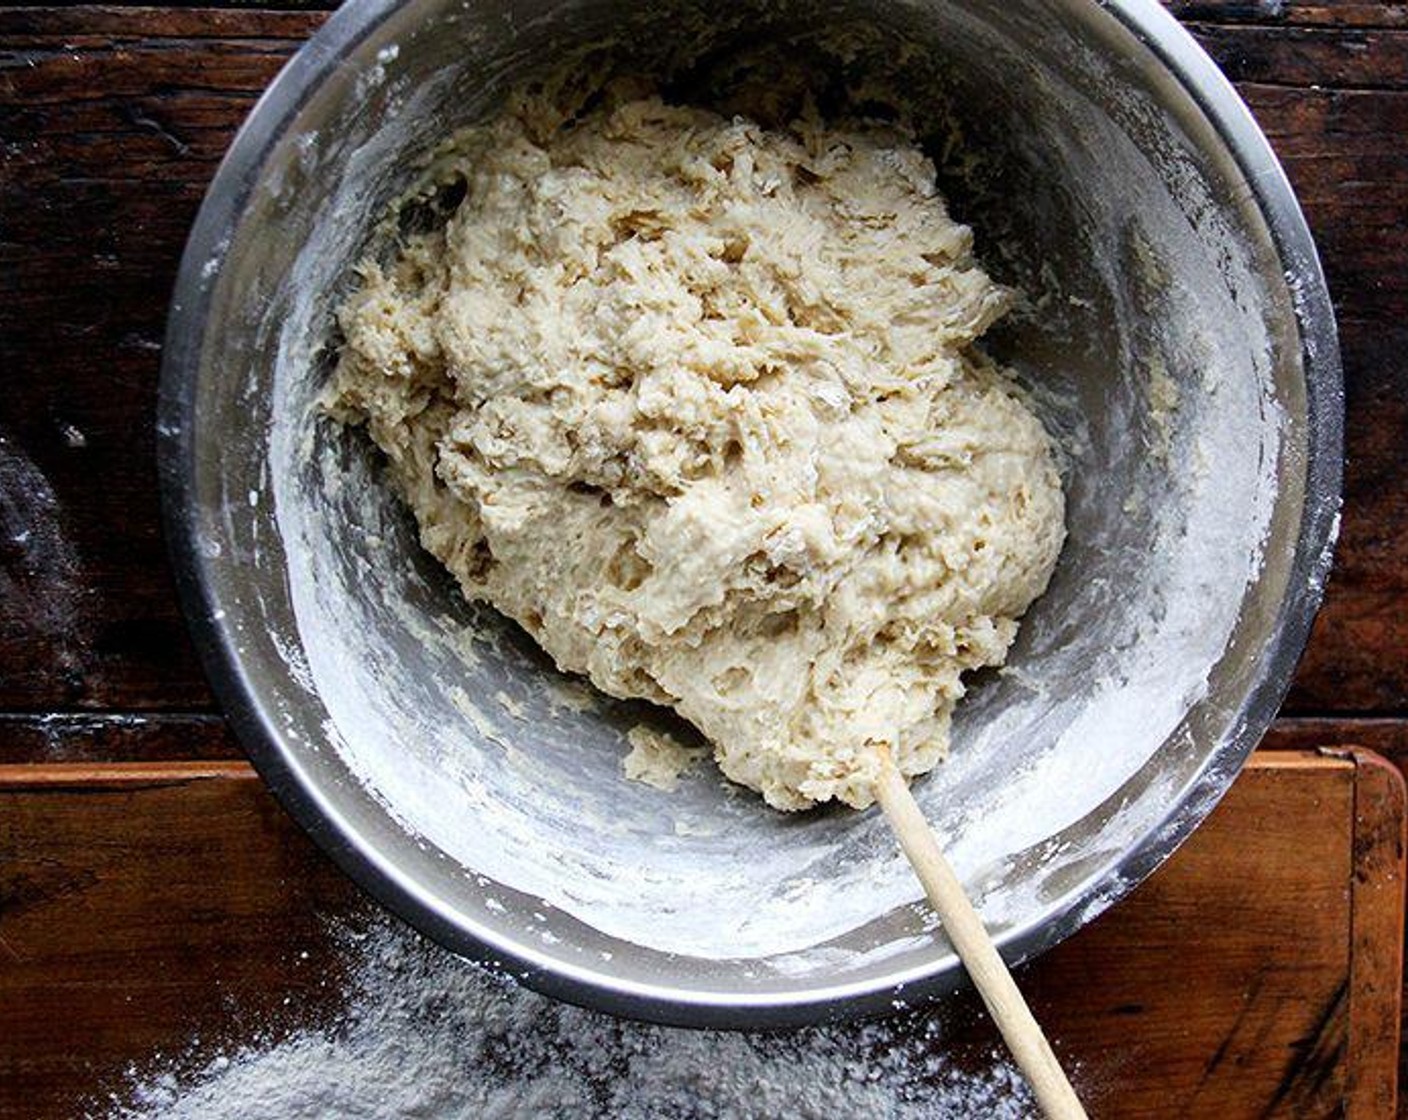 step 4 Stir with a spatula or spoon until well mixed, then add the remaining All-Purpose Flour (3 cups). Stir with a spoon until dough forms a sticky mass.